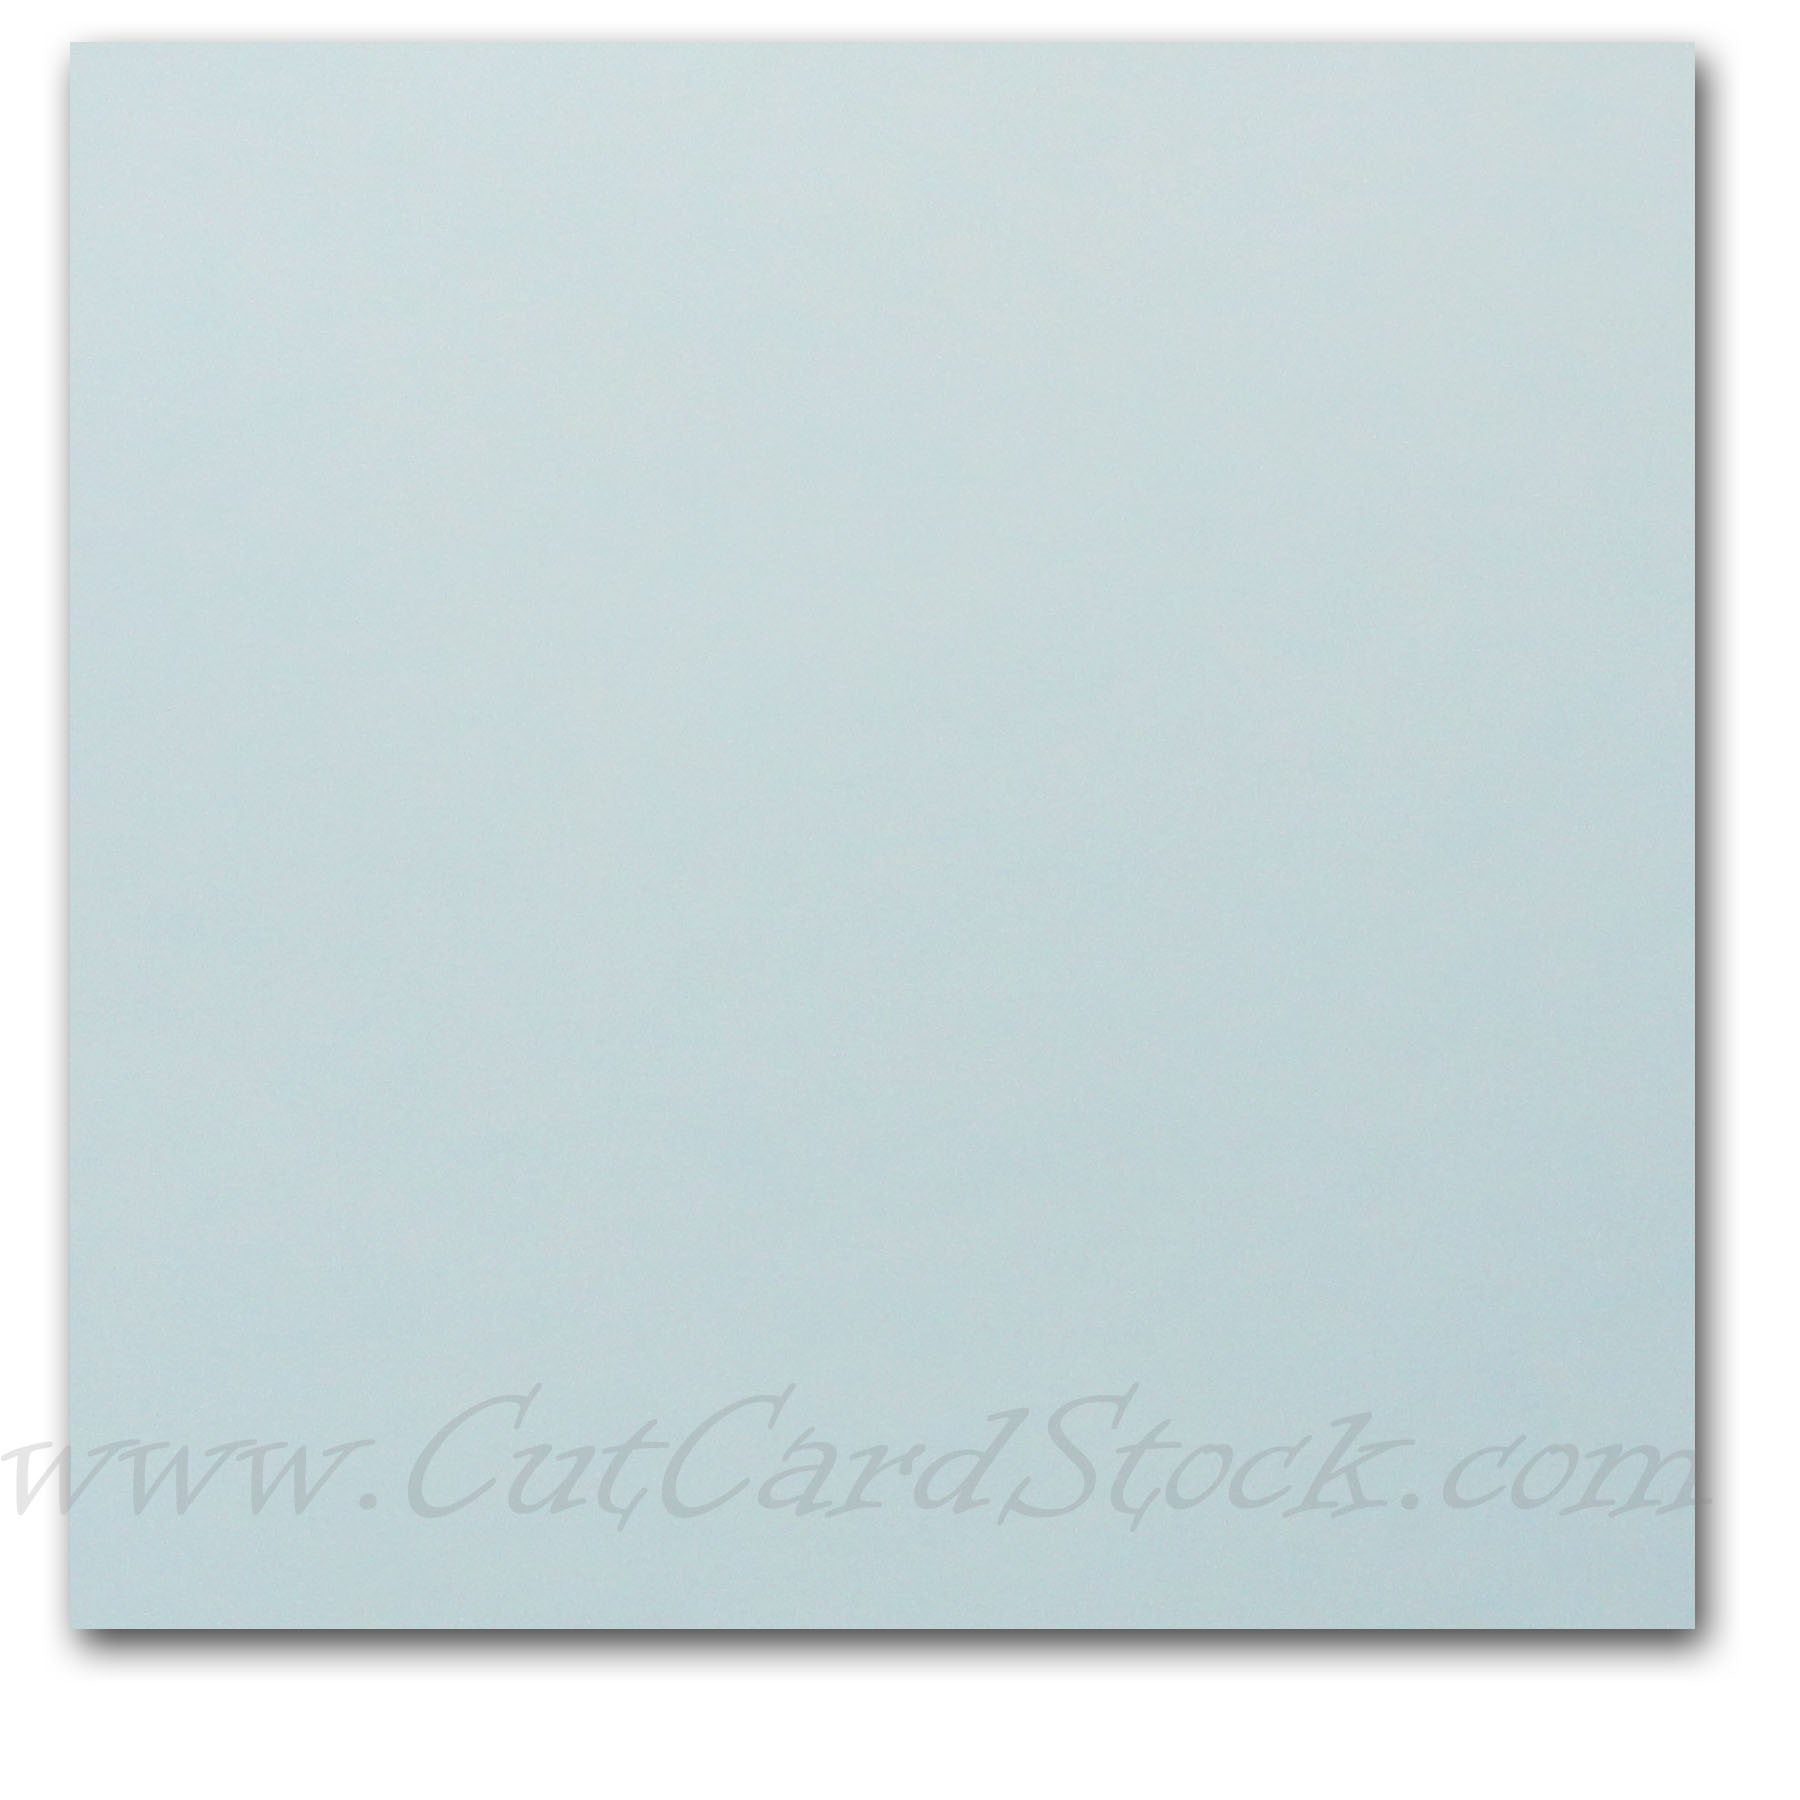 Lettermark Colors (Earthchoice) IVORY VB Cover - 8.5 x 11